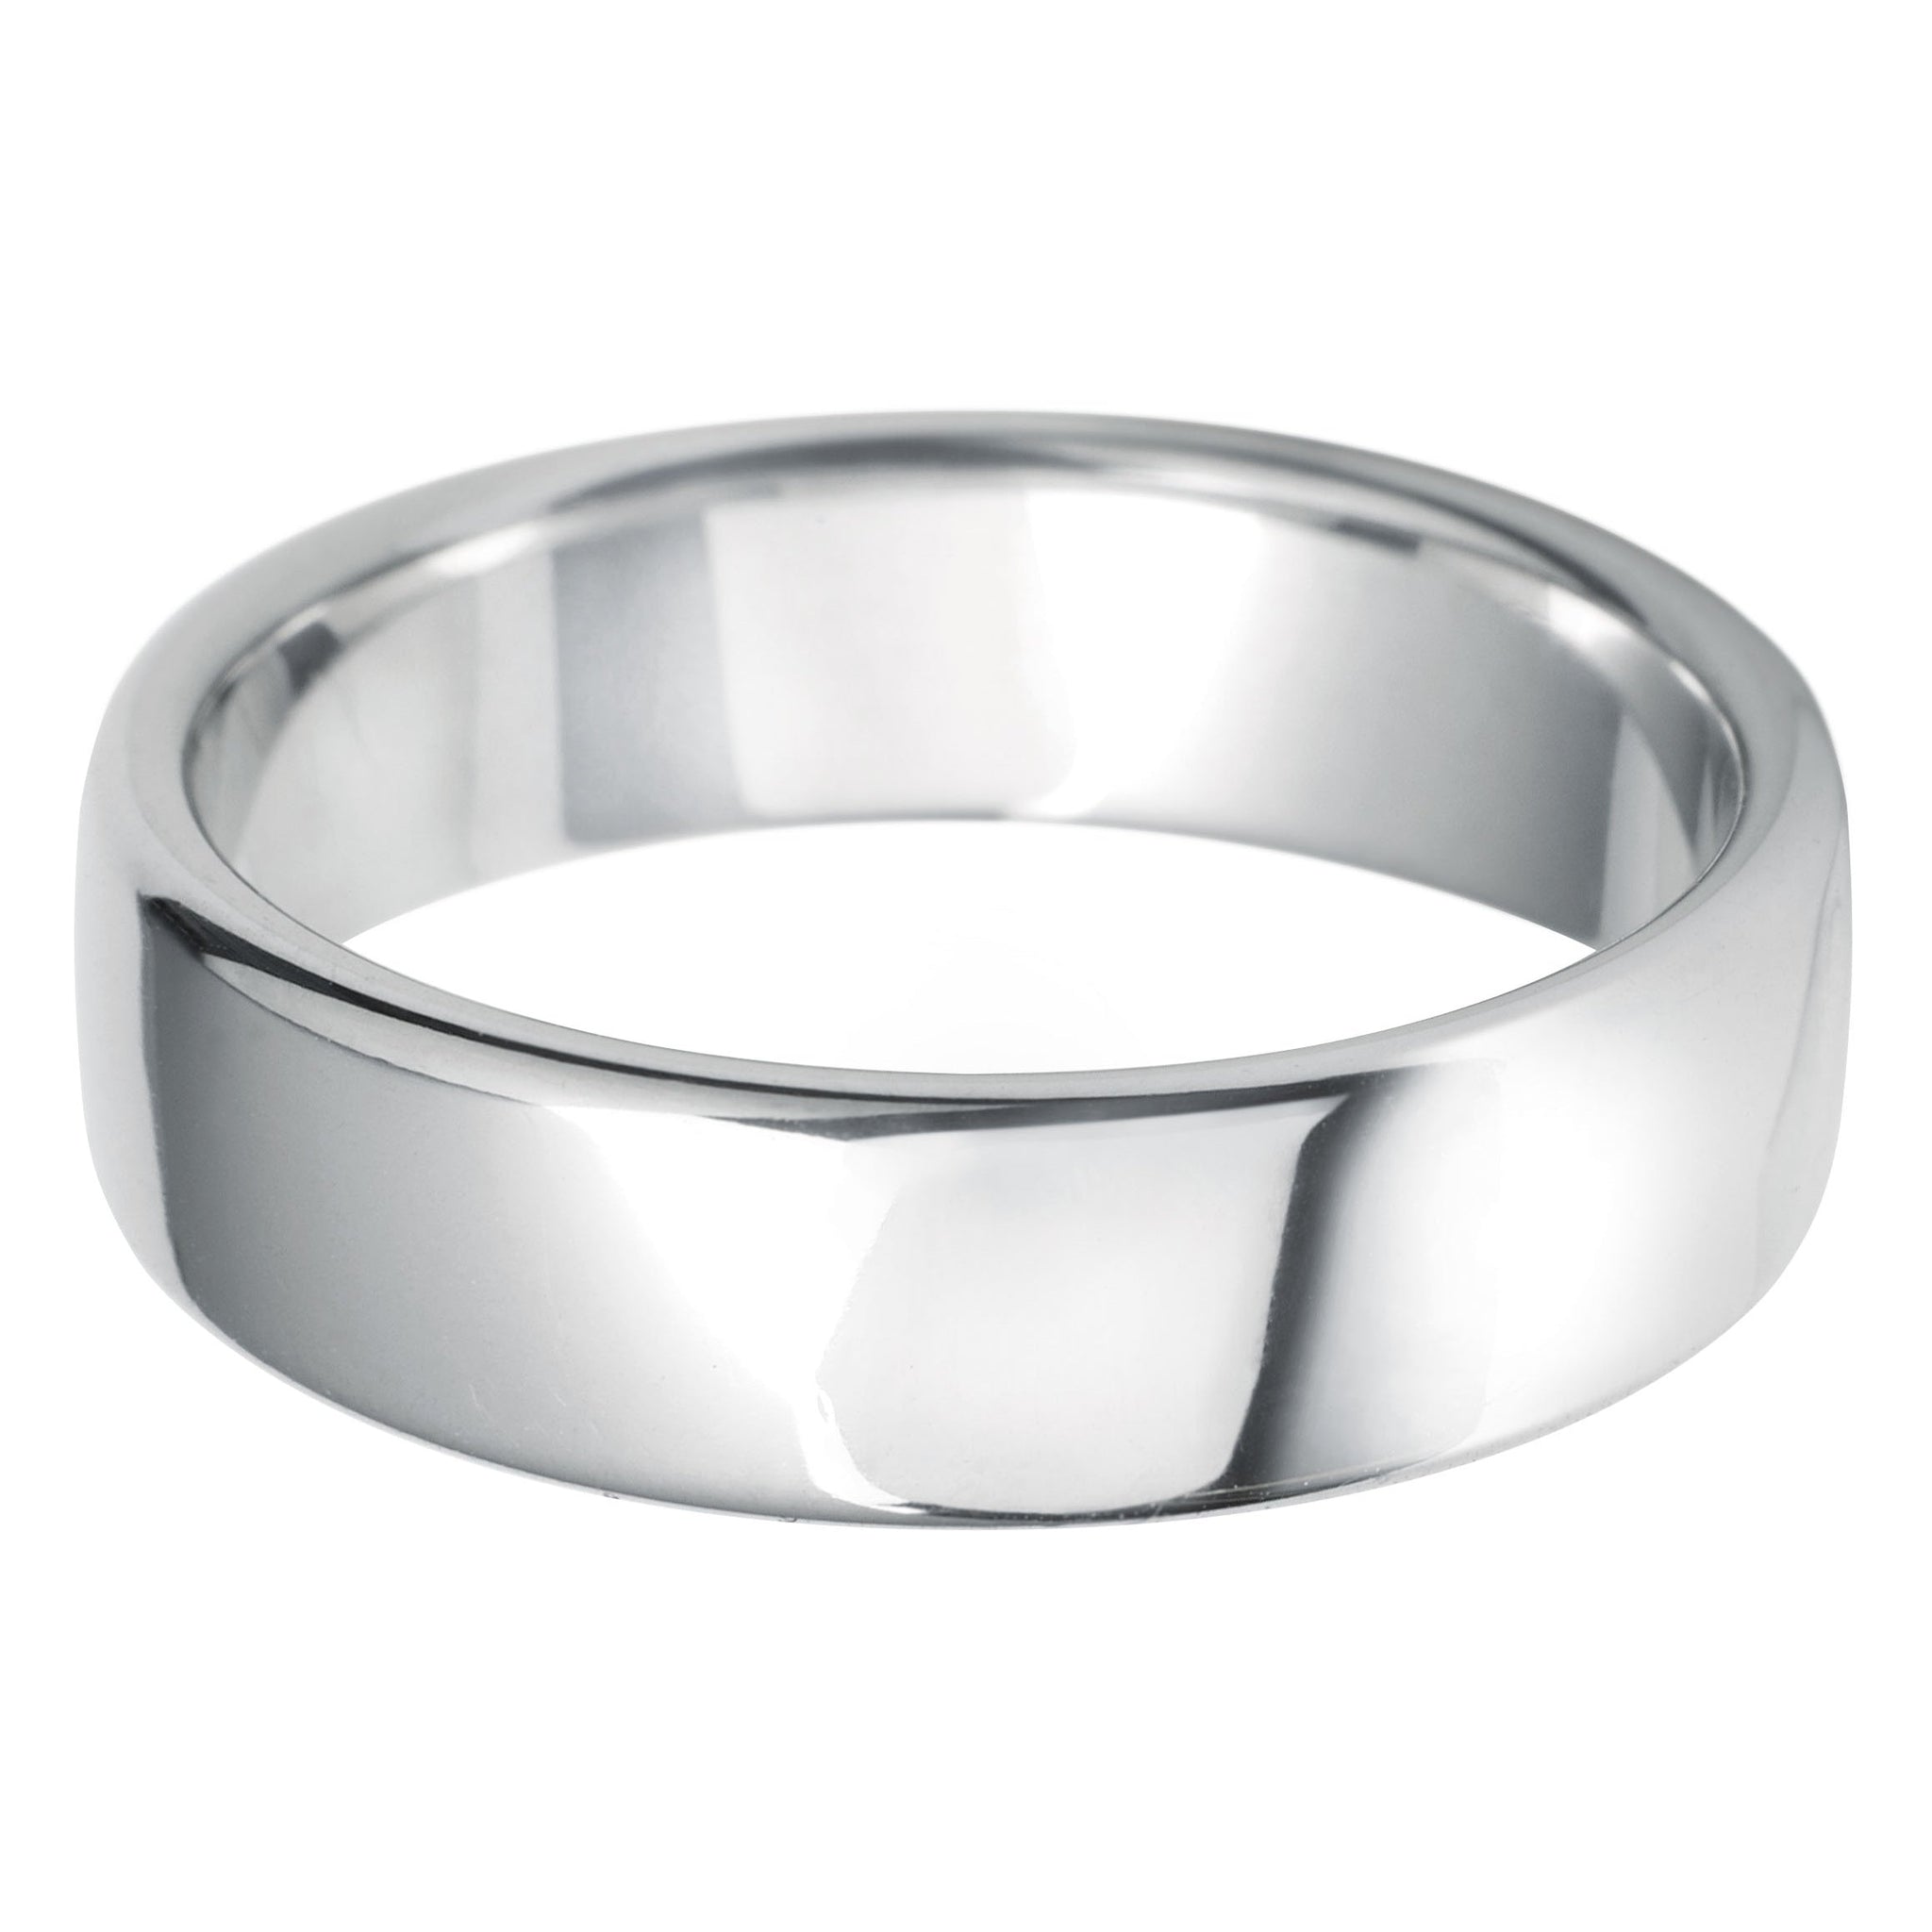 7mm Rounded Flat Heavy Weight Wedding Ring